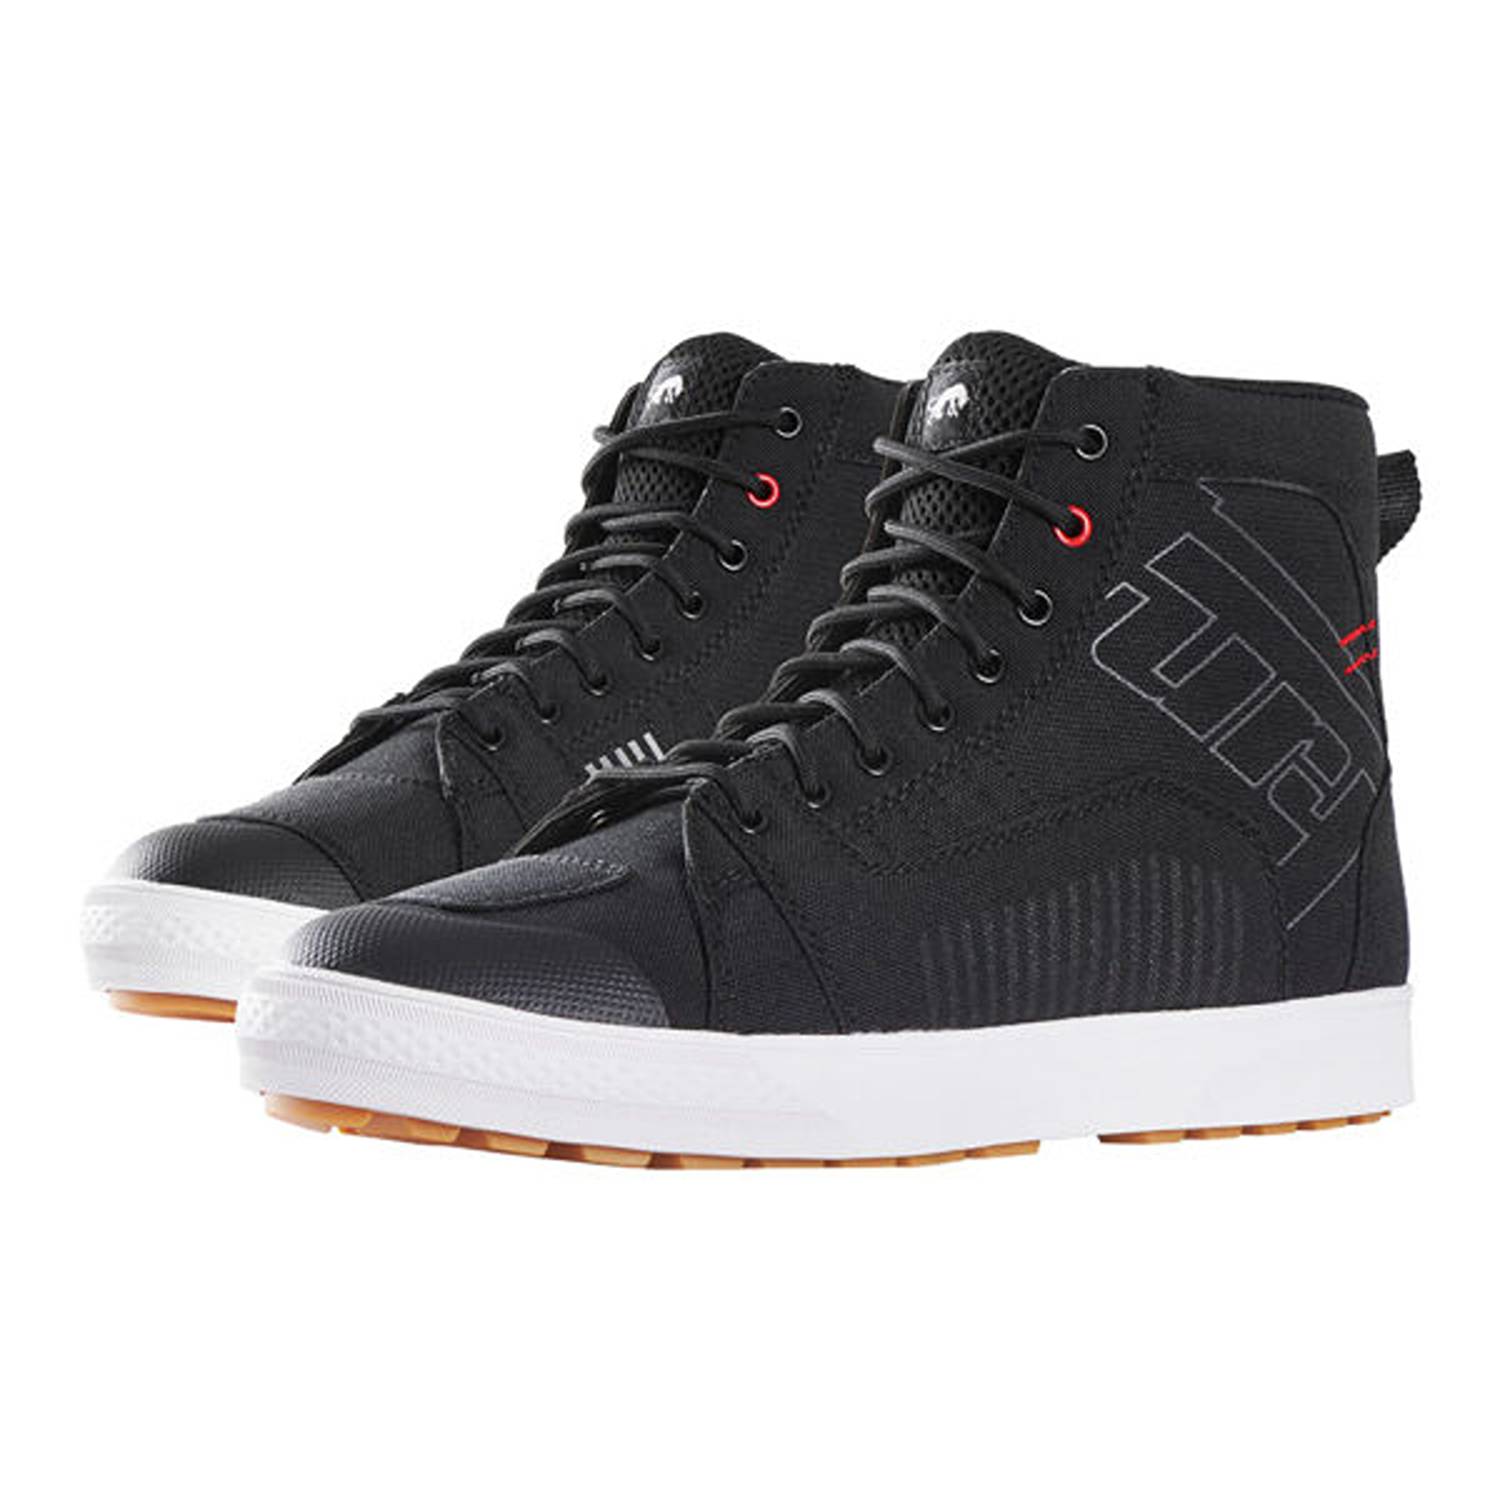 Image of EU Furygan Stockton Air D30 Shoes Black Red Taille 38